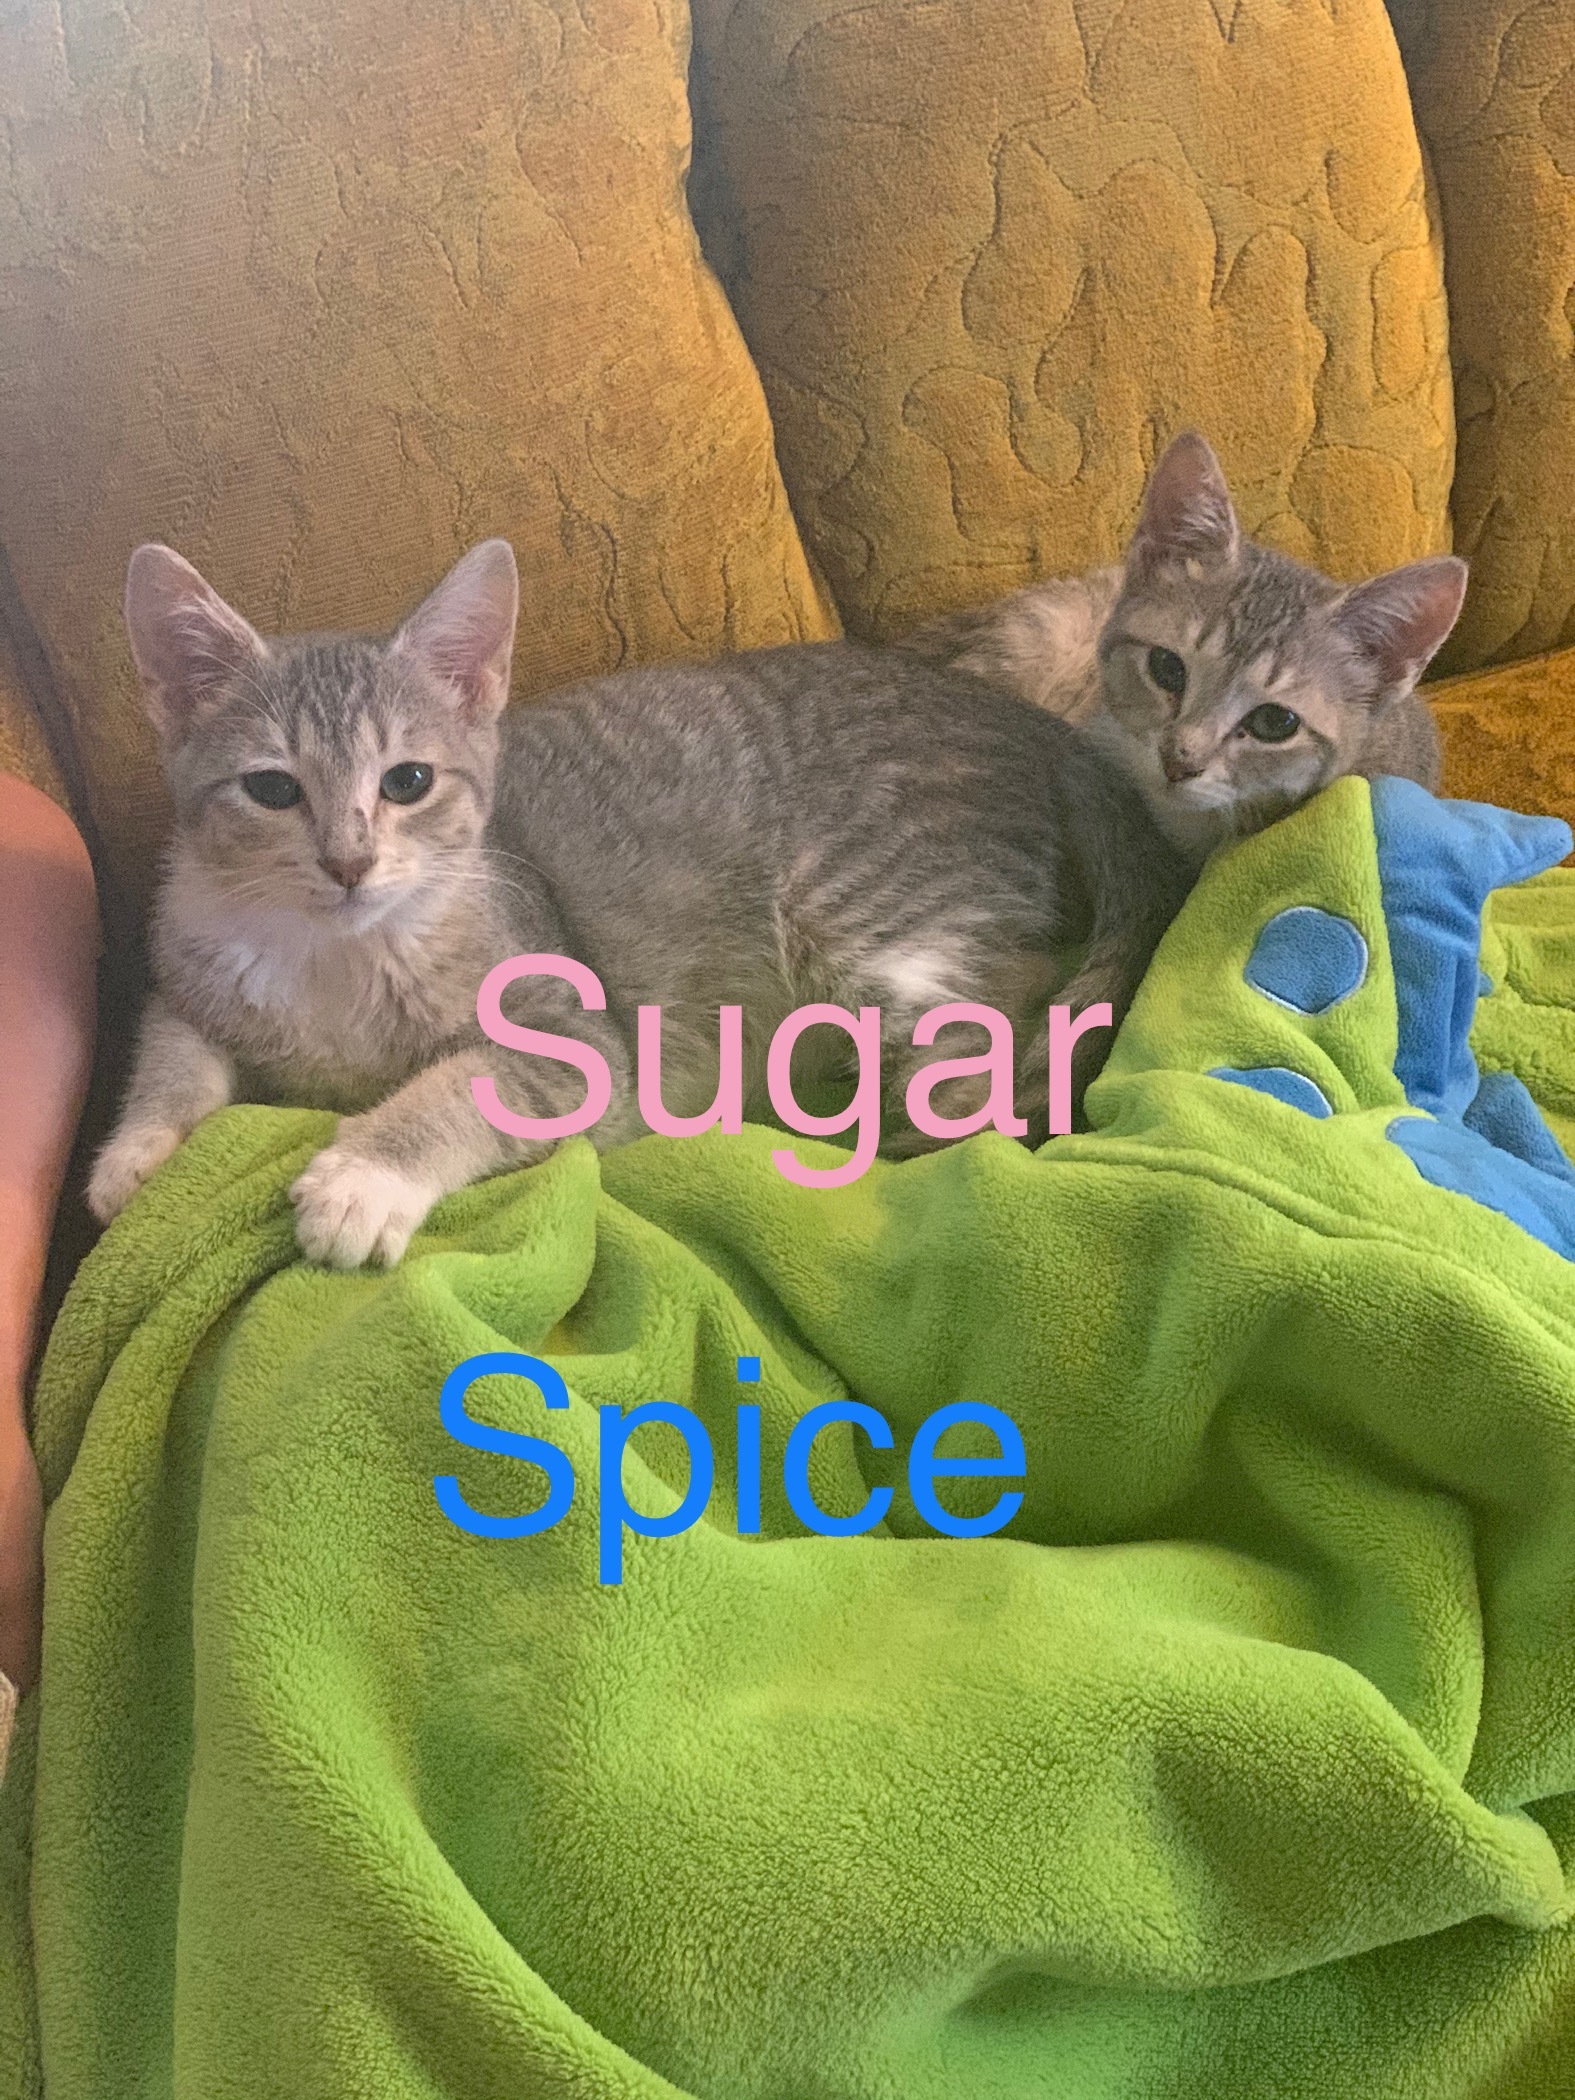 Spice Male Sugar Female Bonded Brother Sister detail page